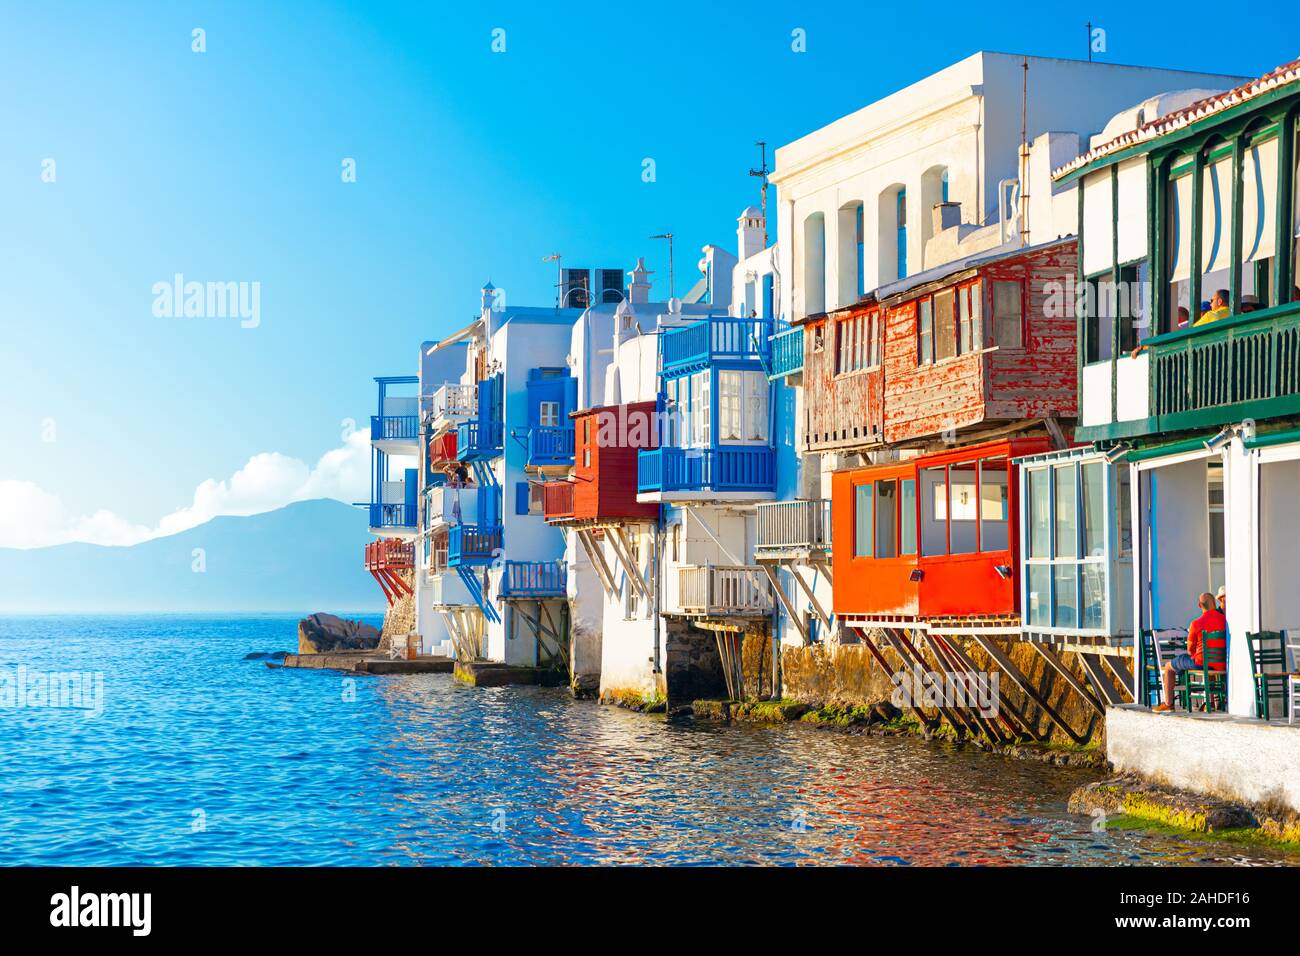 Panoramic view of Mykonos town, Cyclades islands, Greece Stock Photo